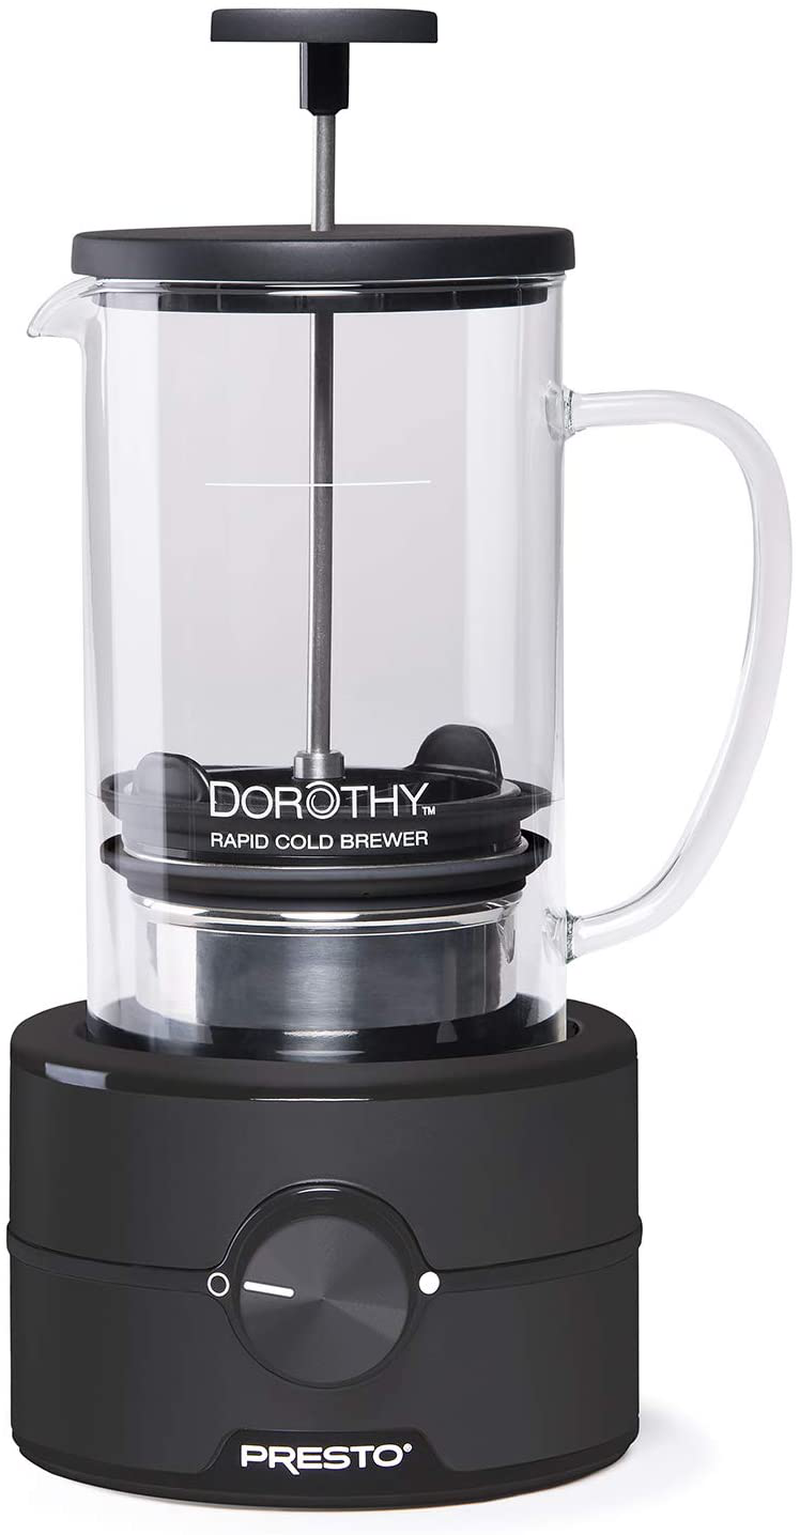 Presto 02937 Dorothy™ Electric Rapid Cold Brewer - Cold brew at home in 15 minutes - No more waiting 12 to 24 hours.